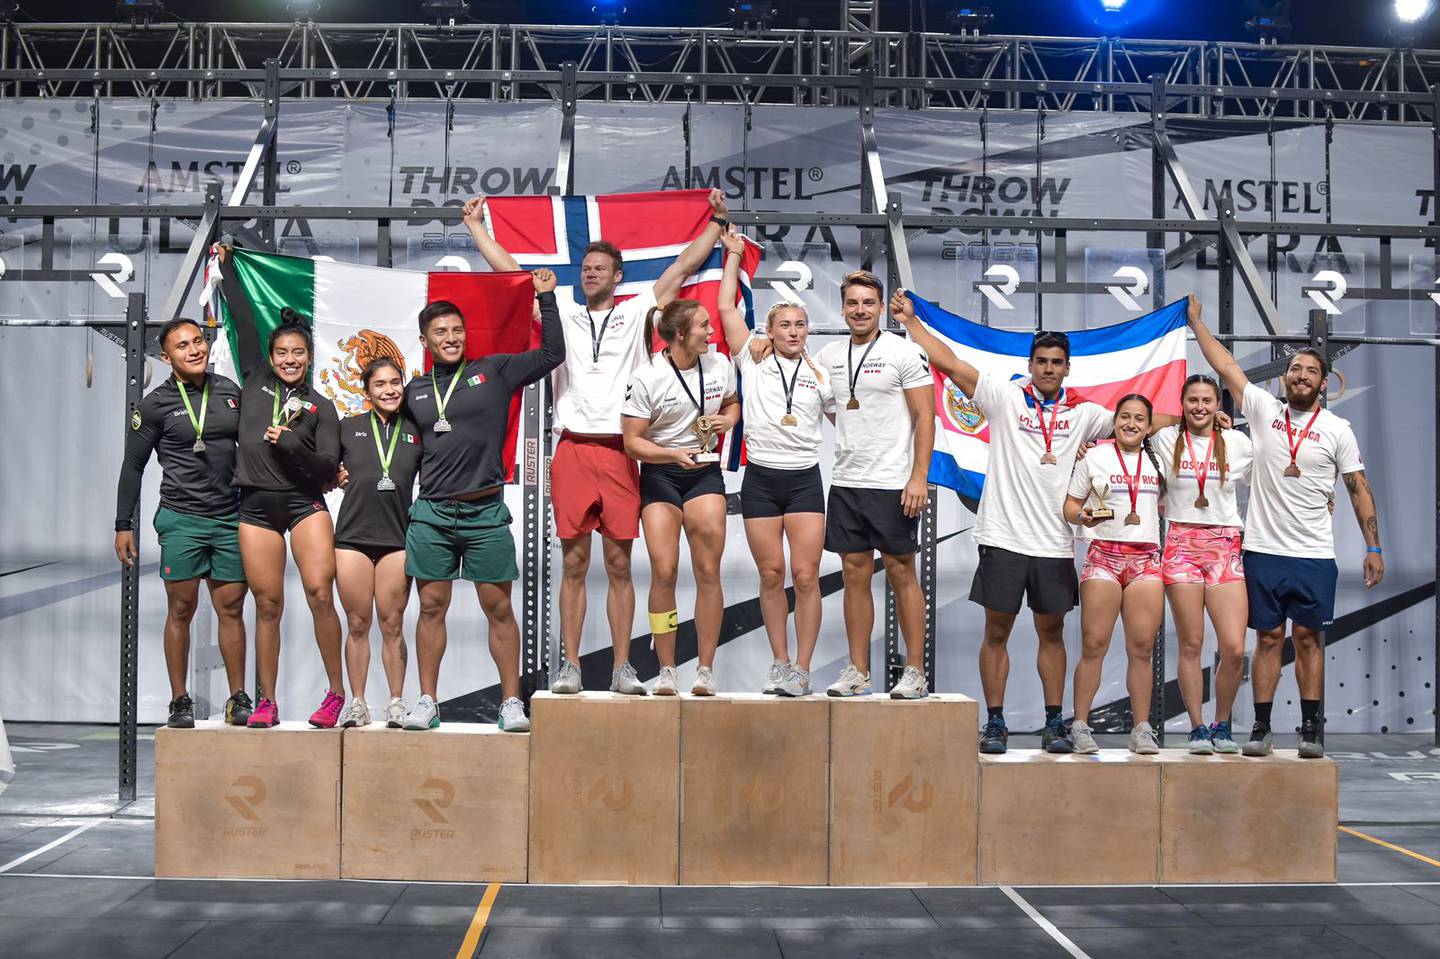 16 Athletes Will Represent Costa Rica At The Functional Fitness World Championships